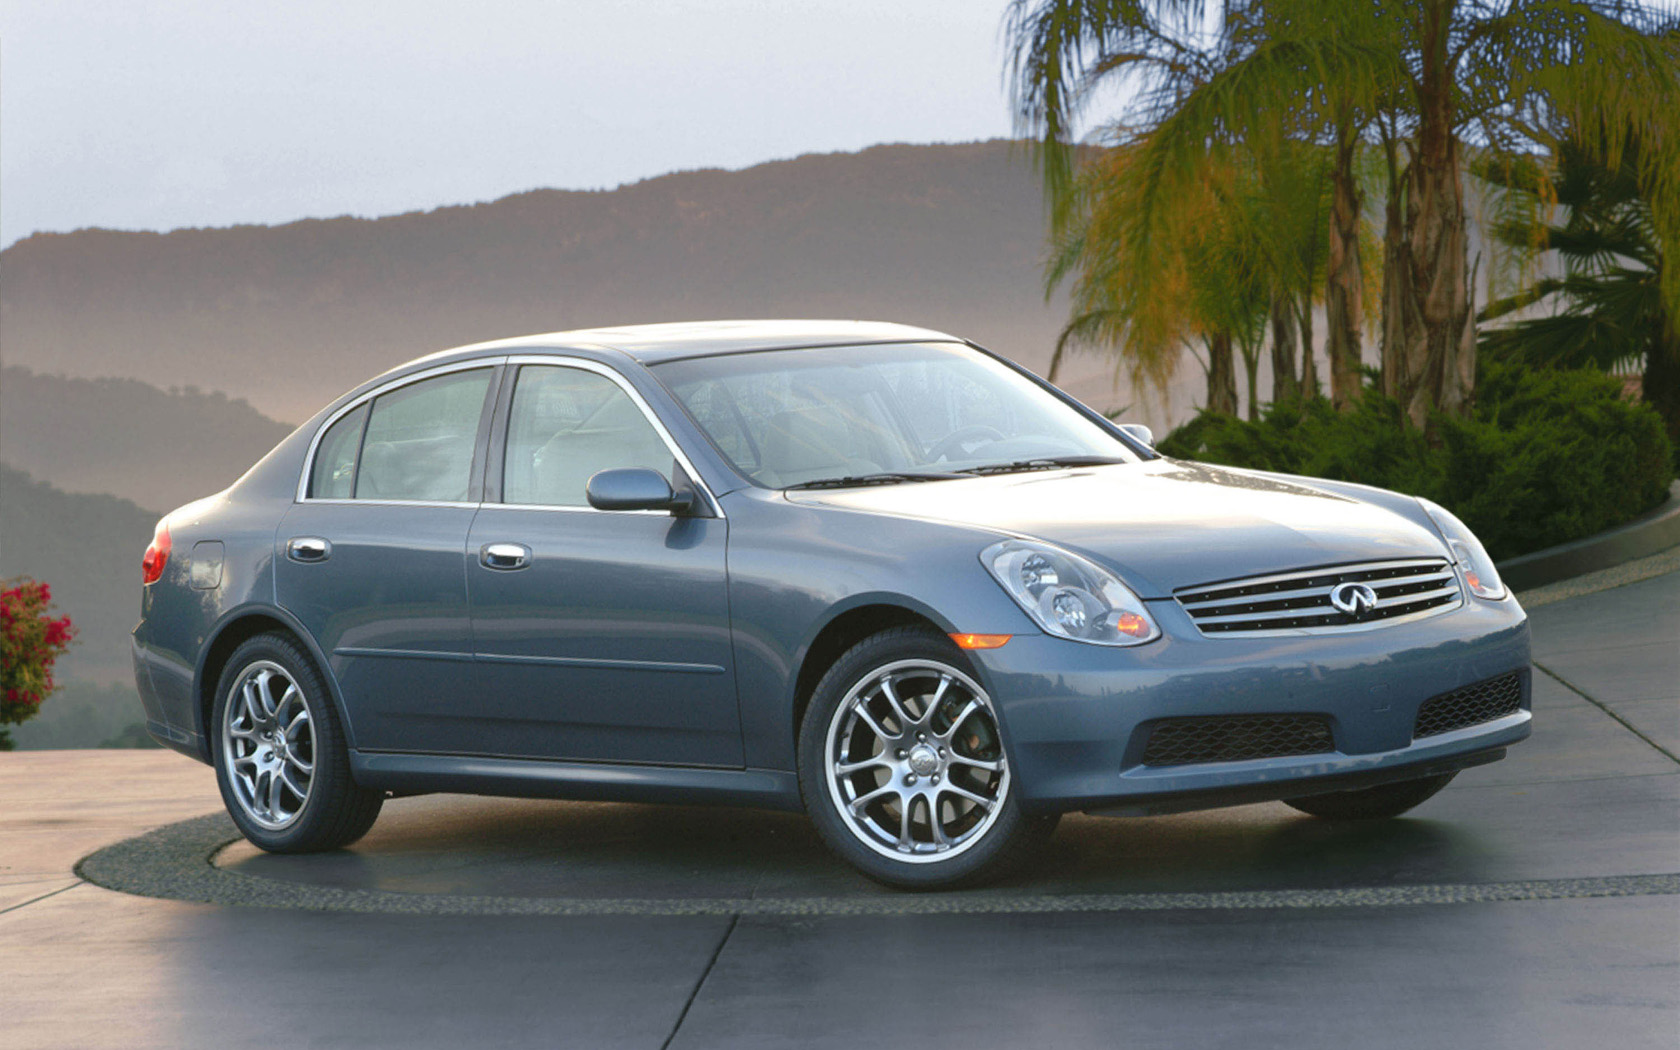 Underrated Ride Of The Week: '05/'06 Infiniti G35 Sedan - The AutoTempest  Blog